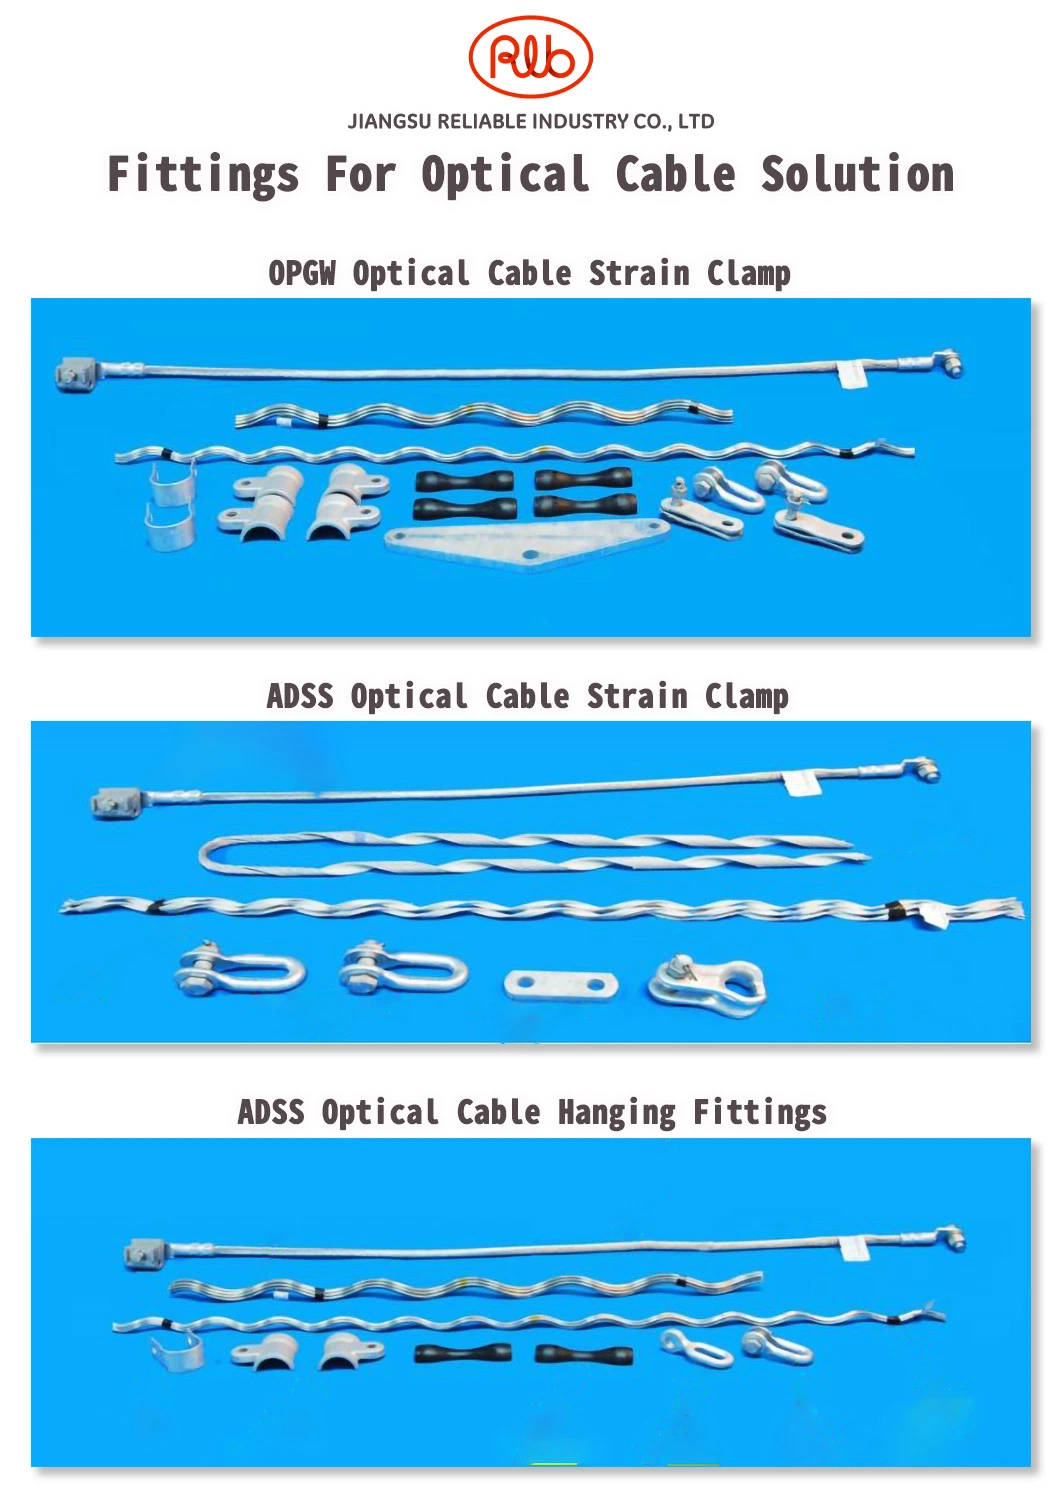 Aluminum Clad Steel High Quality Preformed Hanging Fittings for Opgw/ADSS Optical Cable